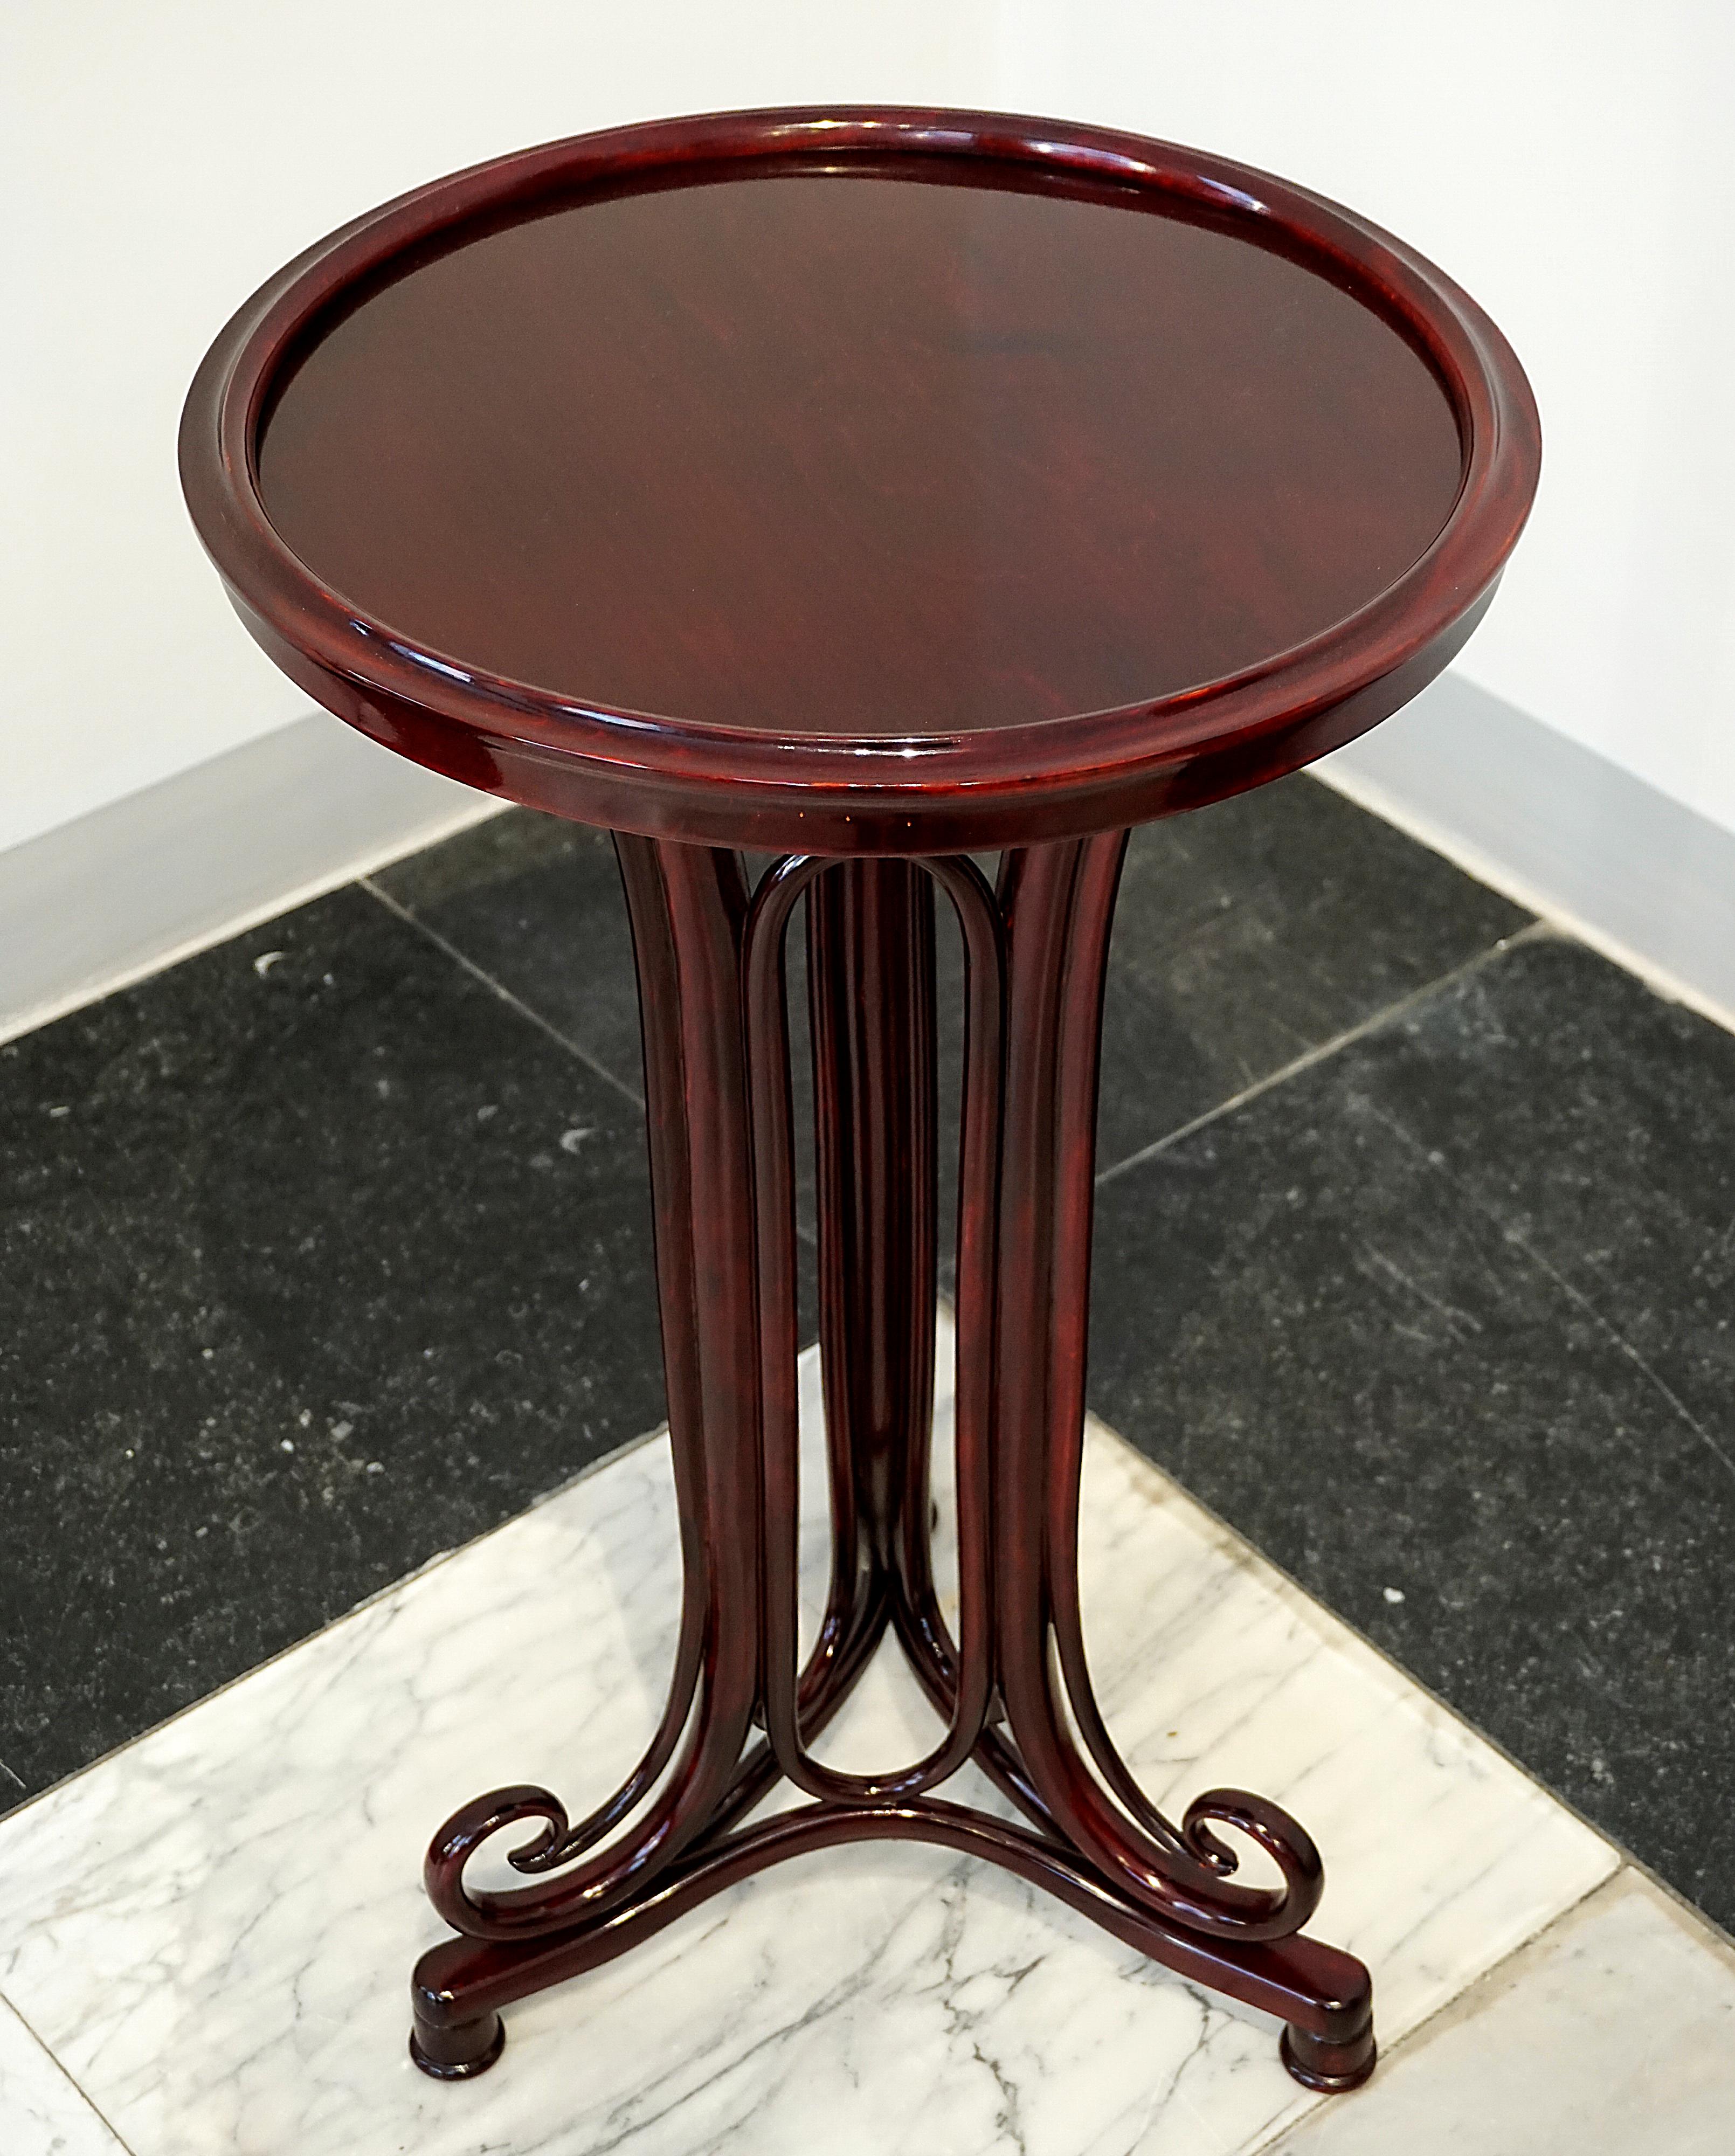 Austrian Thonet Vienna Art Nouveau Saloon Reading Table No 1 Mahogany Stained circa 1900  For Sale